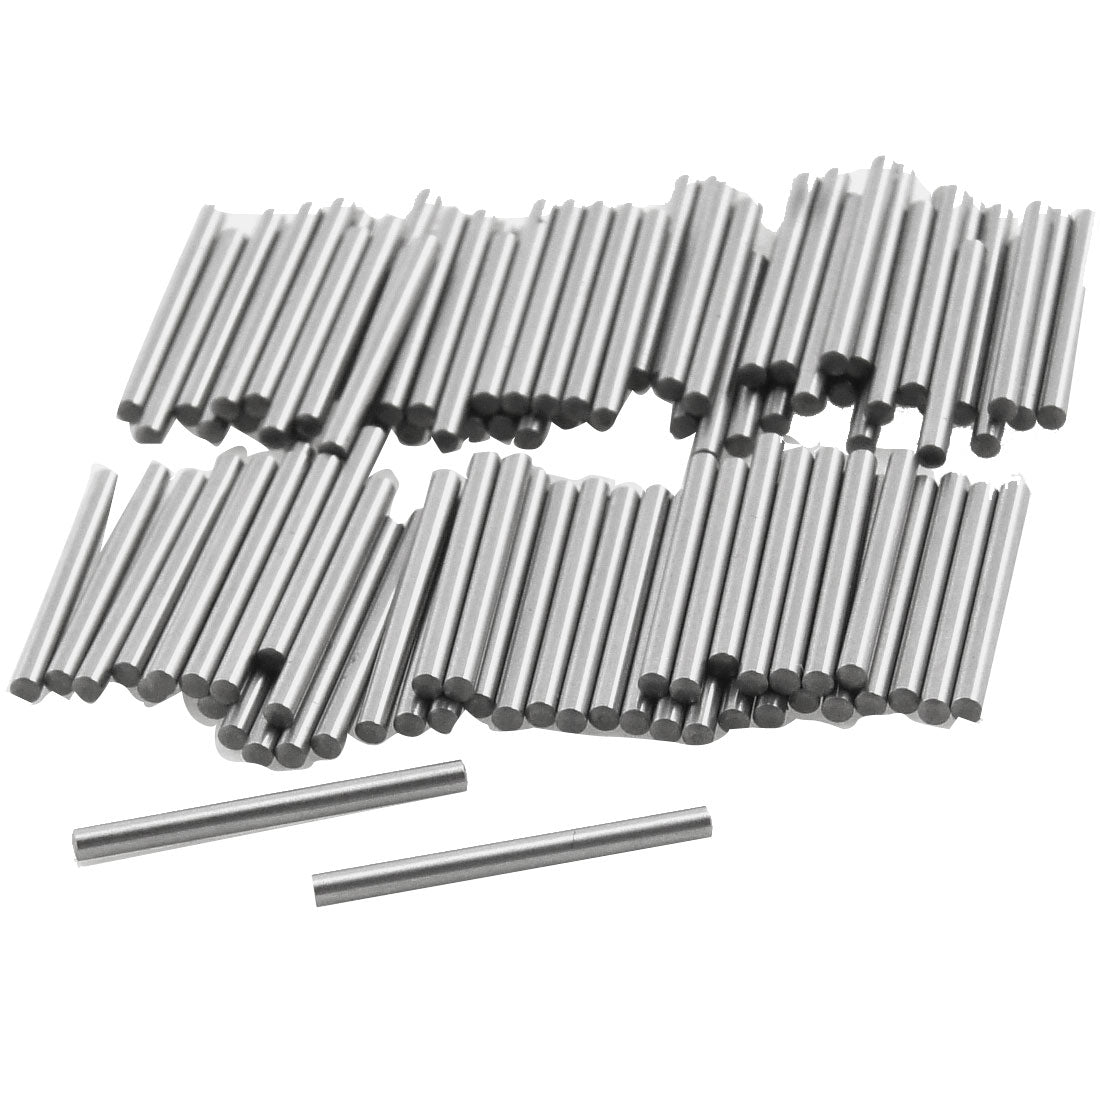 uxcell Uxcell 100 Pcs Stainless Steel 1.45mm x 15.8mm Dowel Pins Fasten Elements